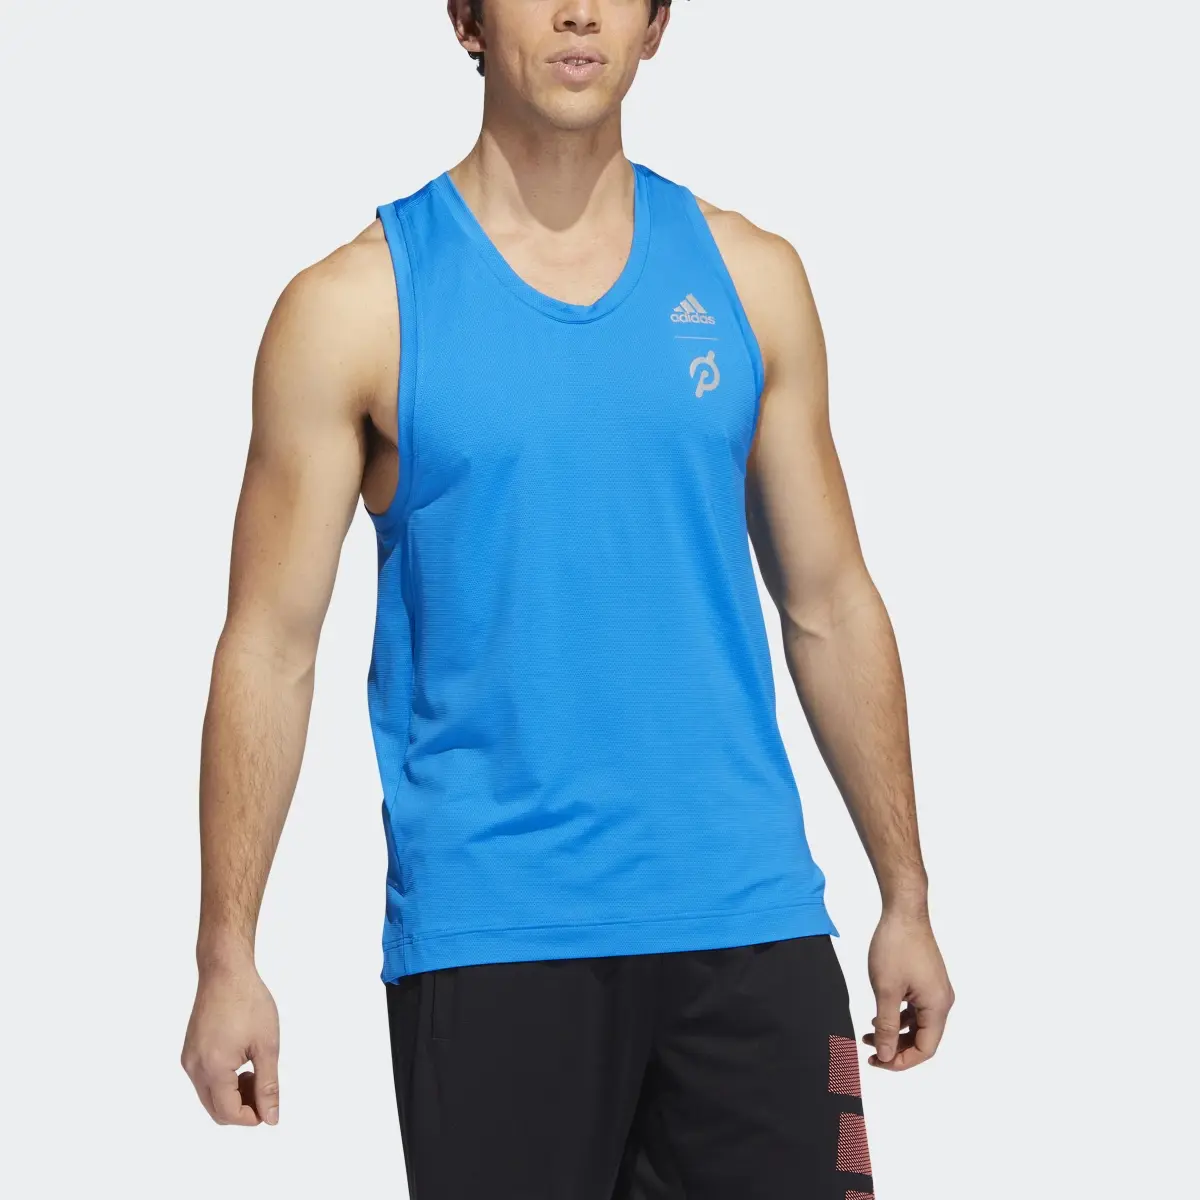 Adidas Capable of Greatness Training Tank Top. 1